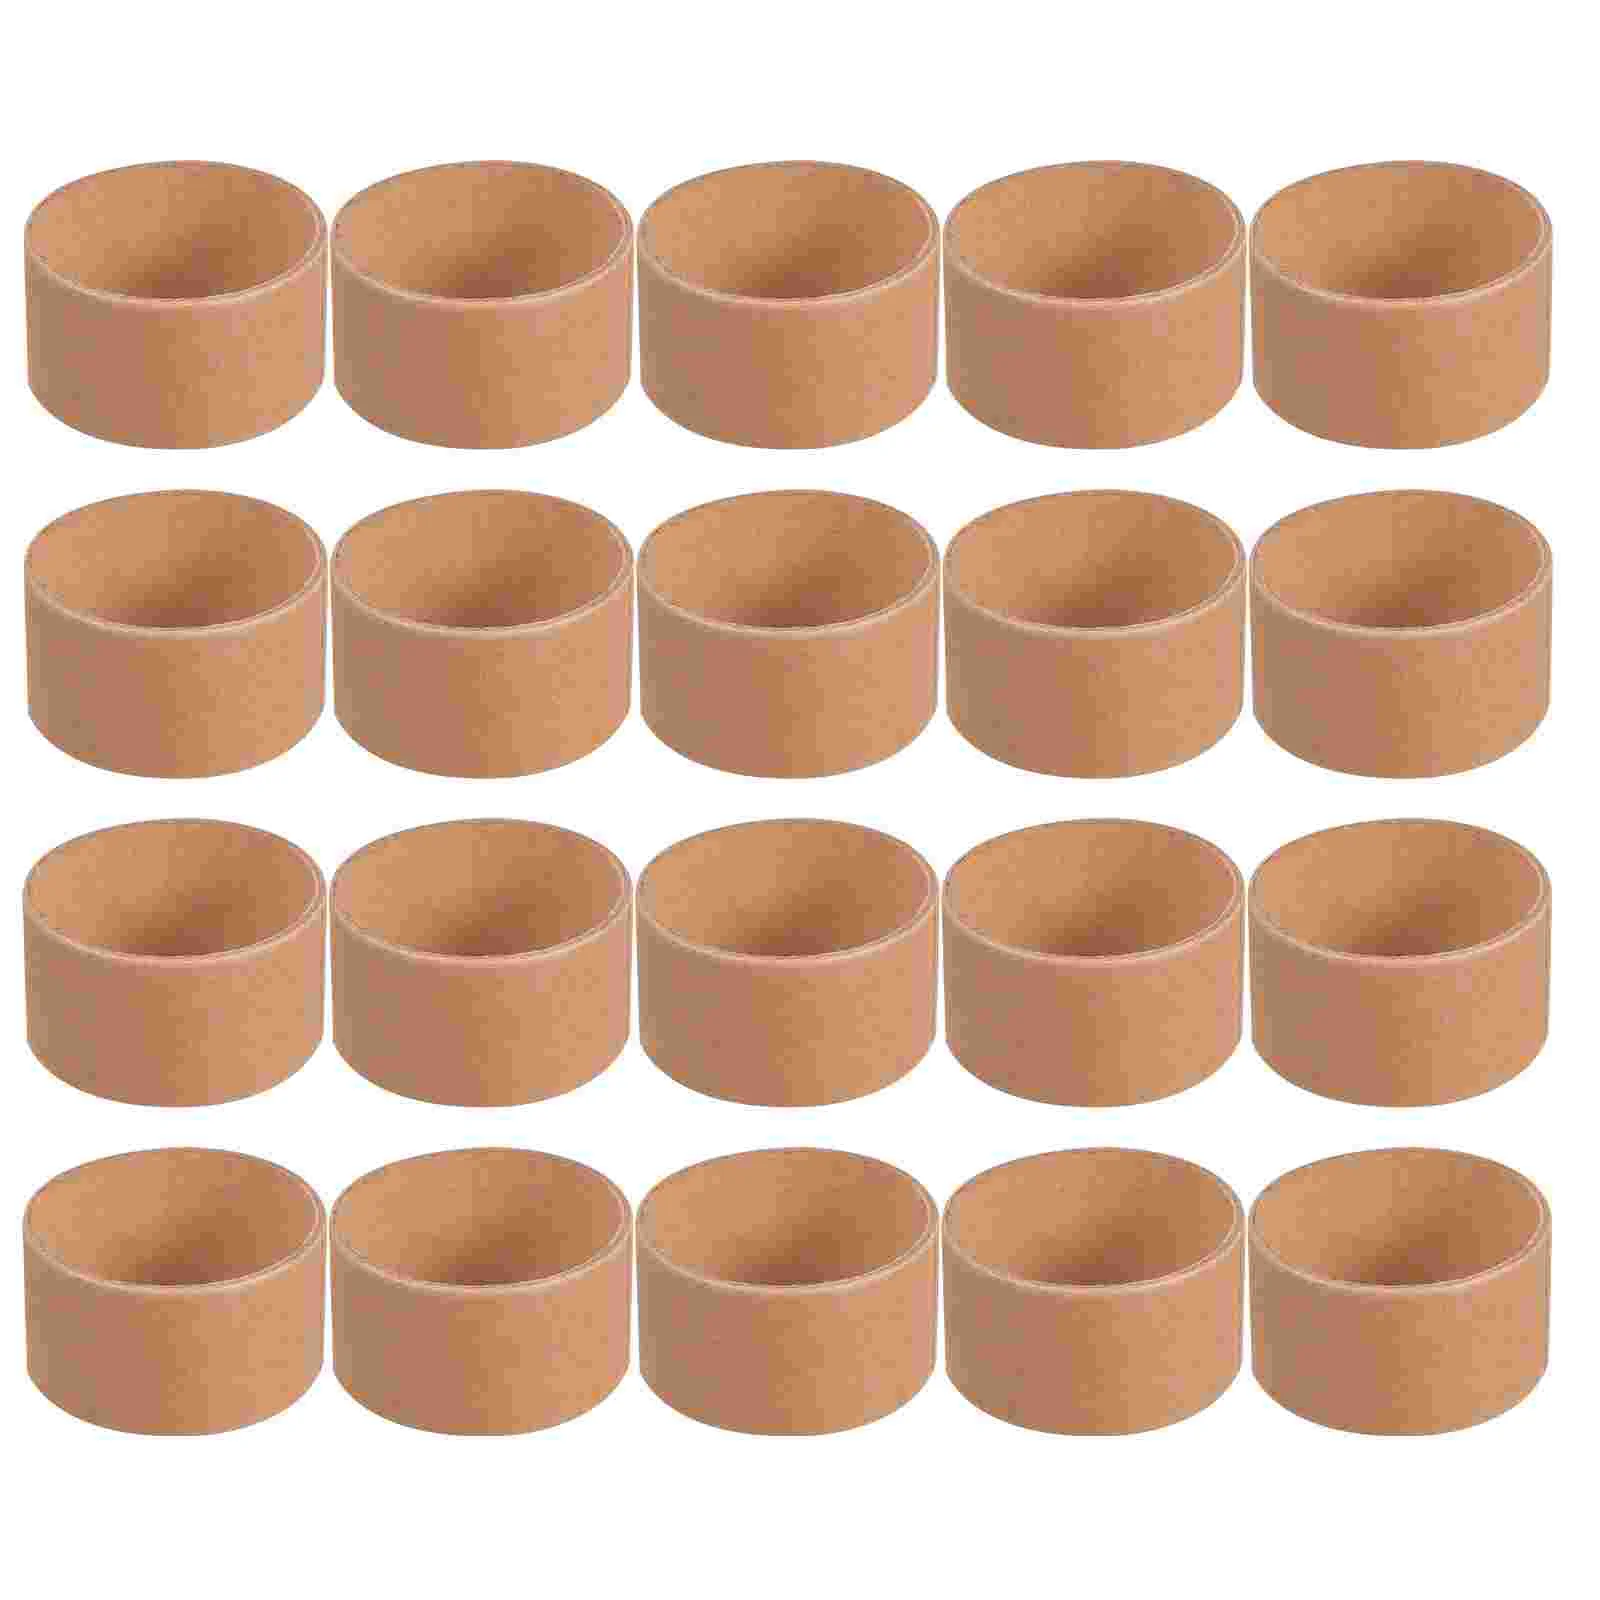 Paper Cardboard Roll Crafts Toilet Tubes Tubes Craftroll Kraft Round Towel Brown Crafts Art Diy Tube Empty Small Thin Rolls